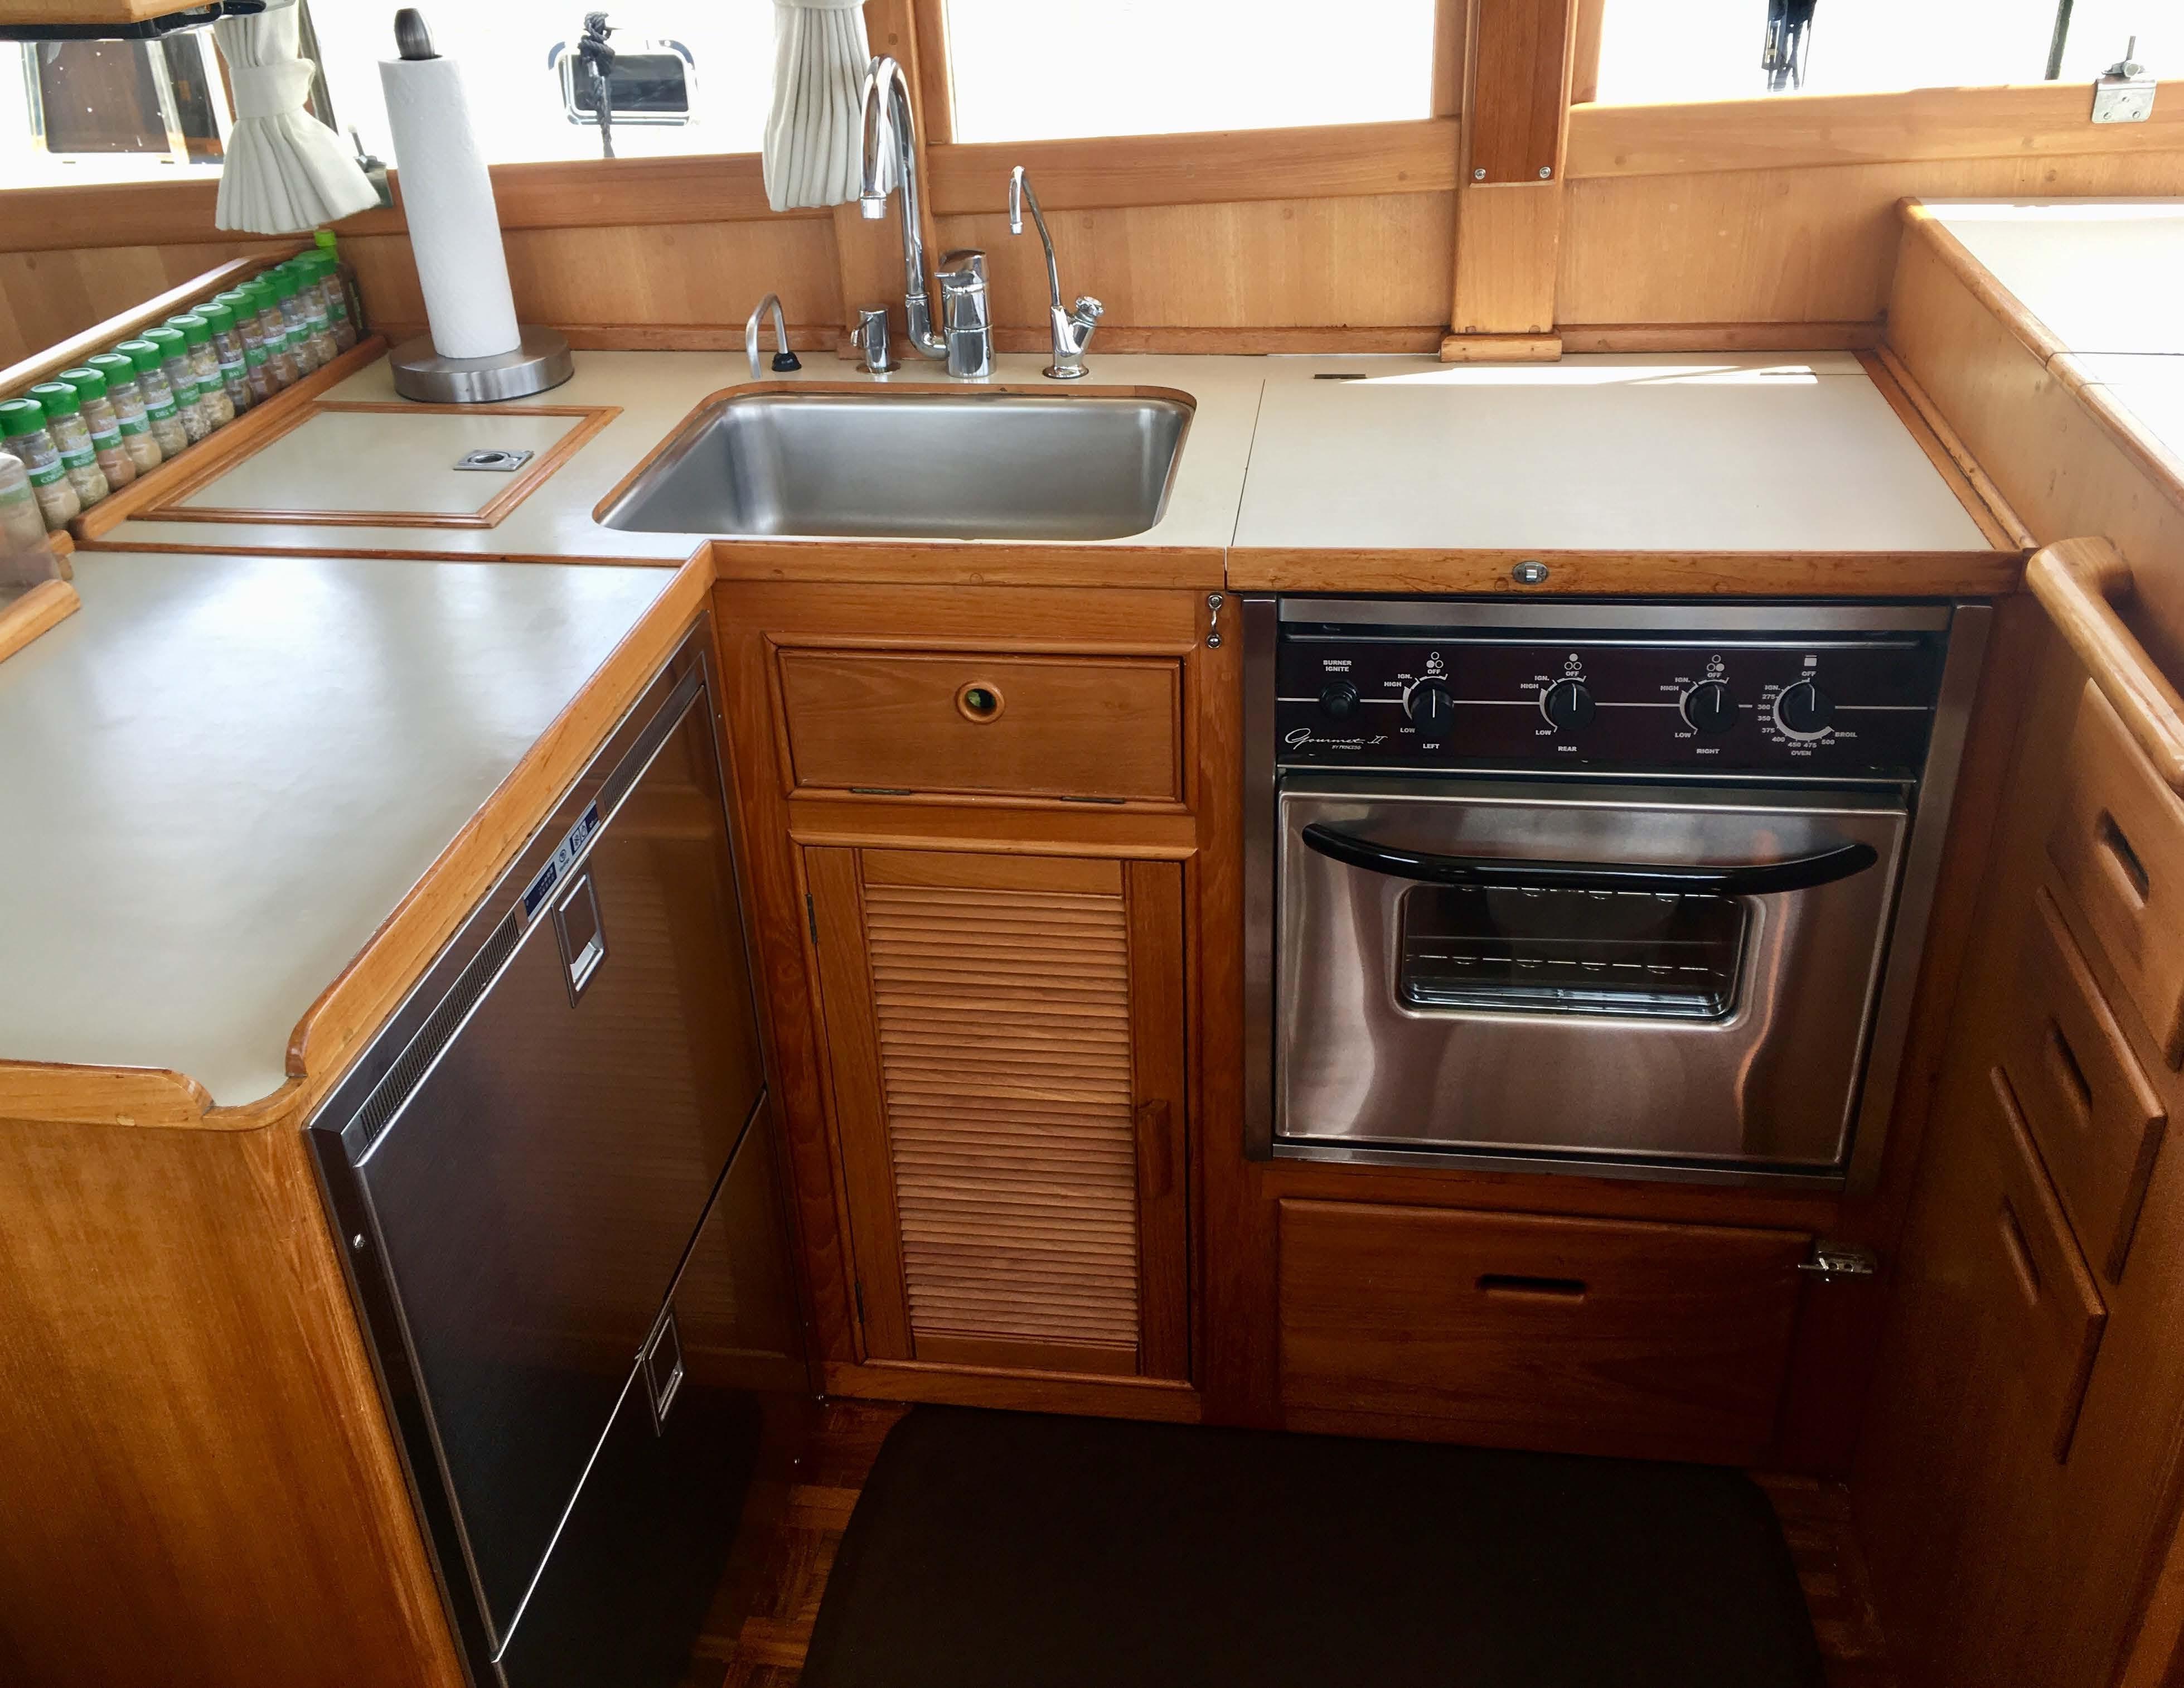 Galley outfitted with all of the amenities